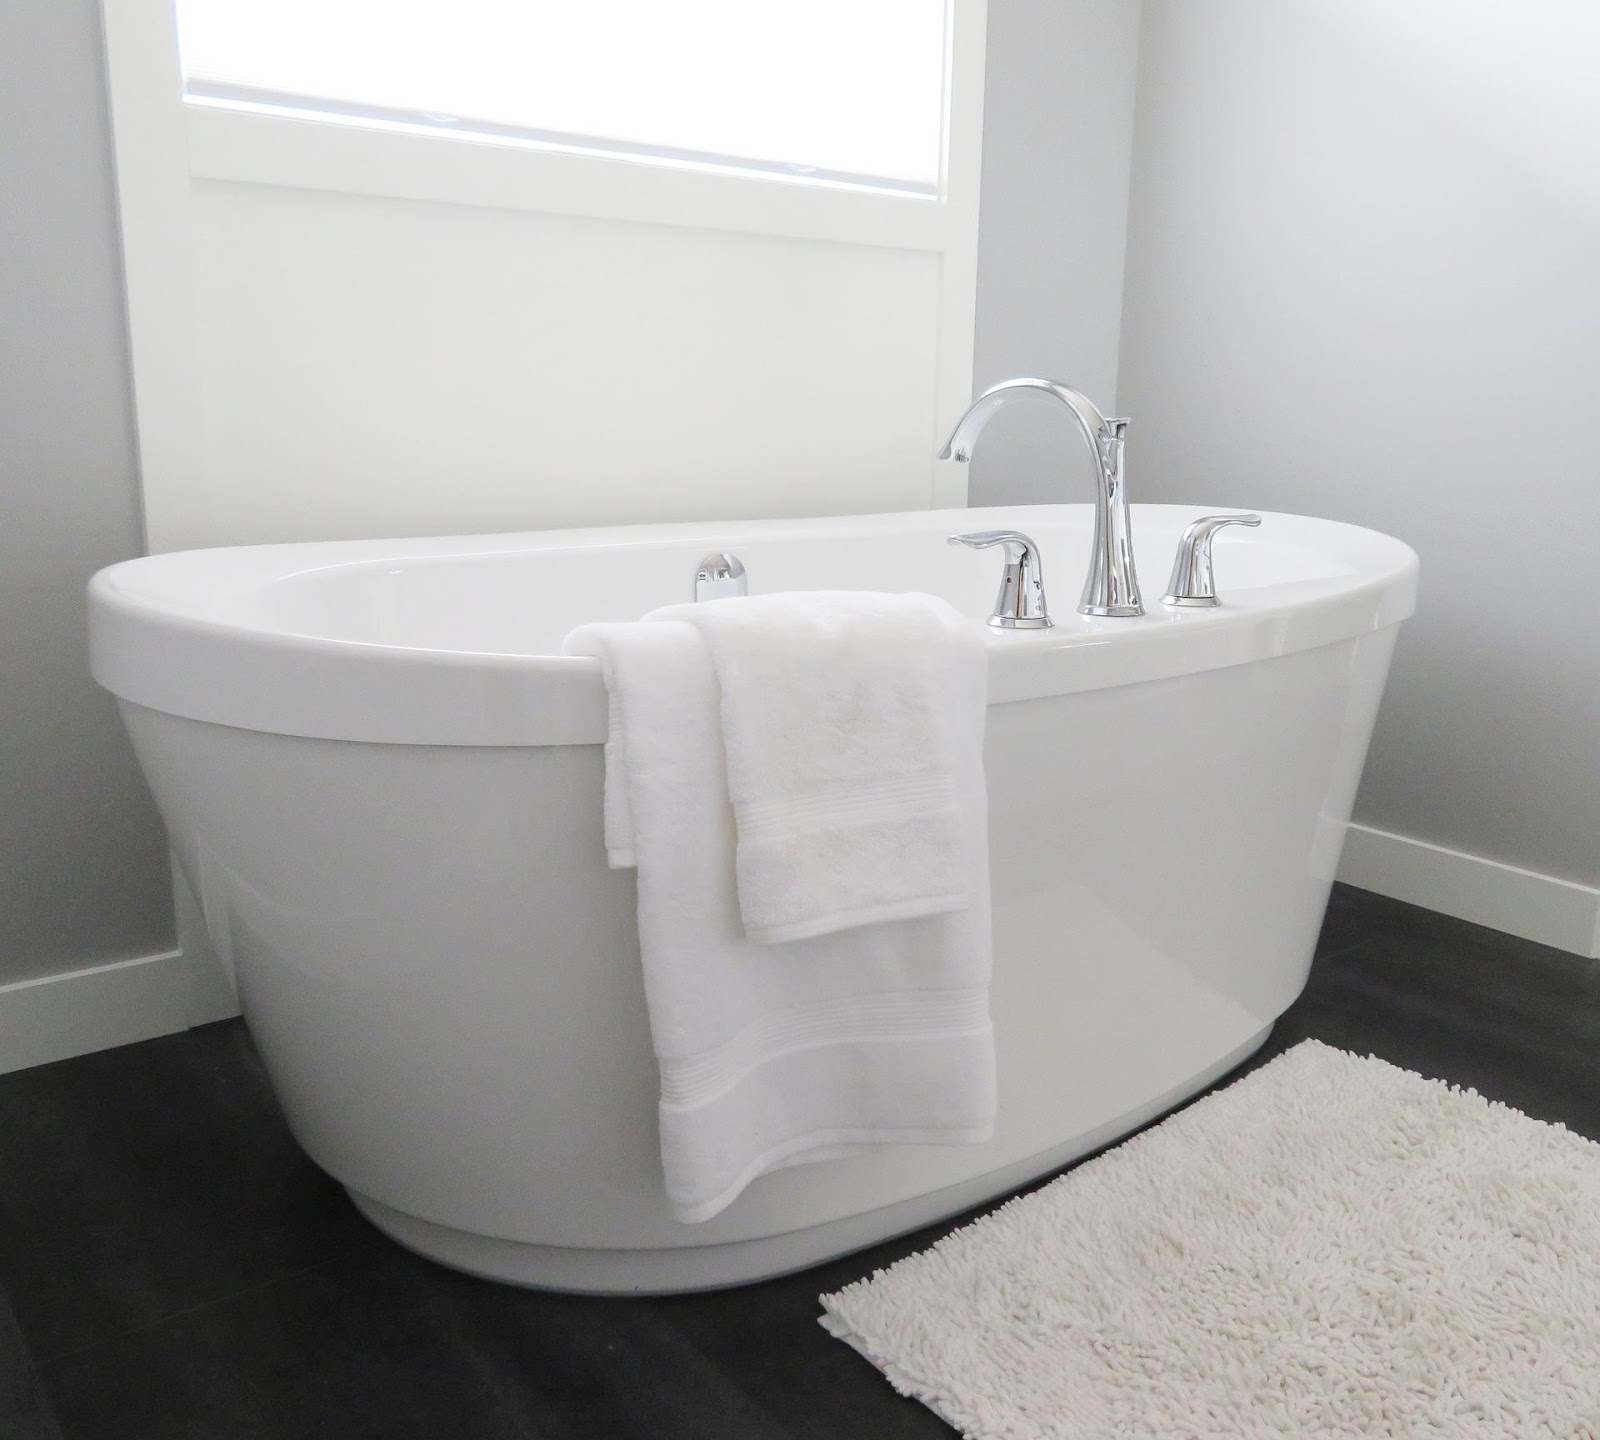 4 Things You Should Know Before Changing Your Bathtub